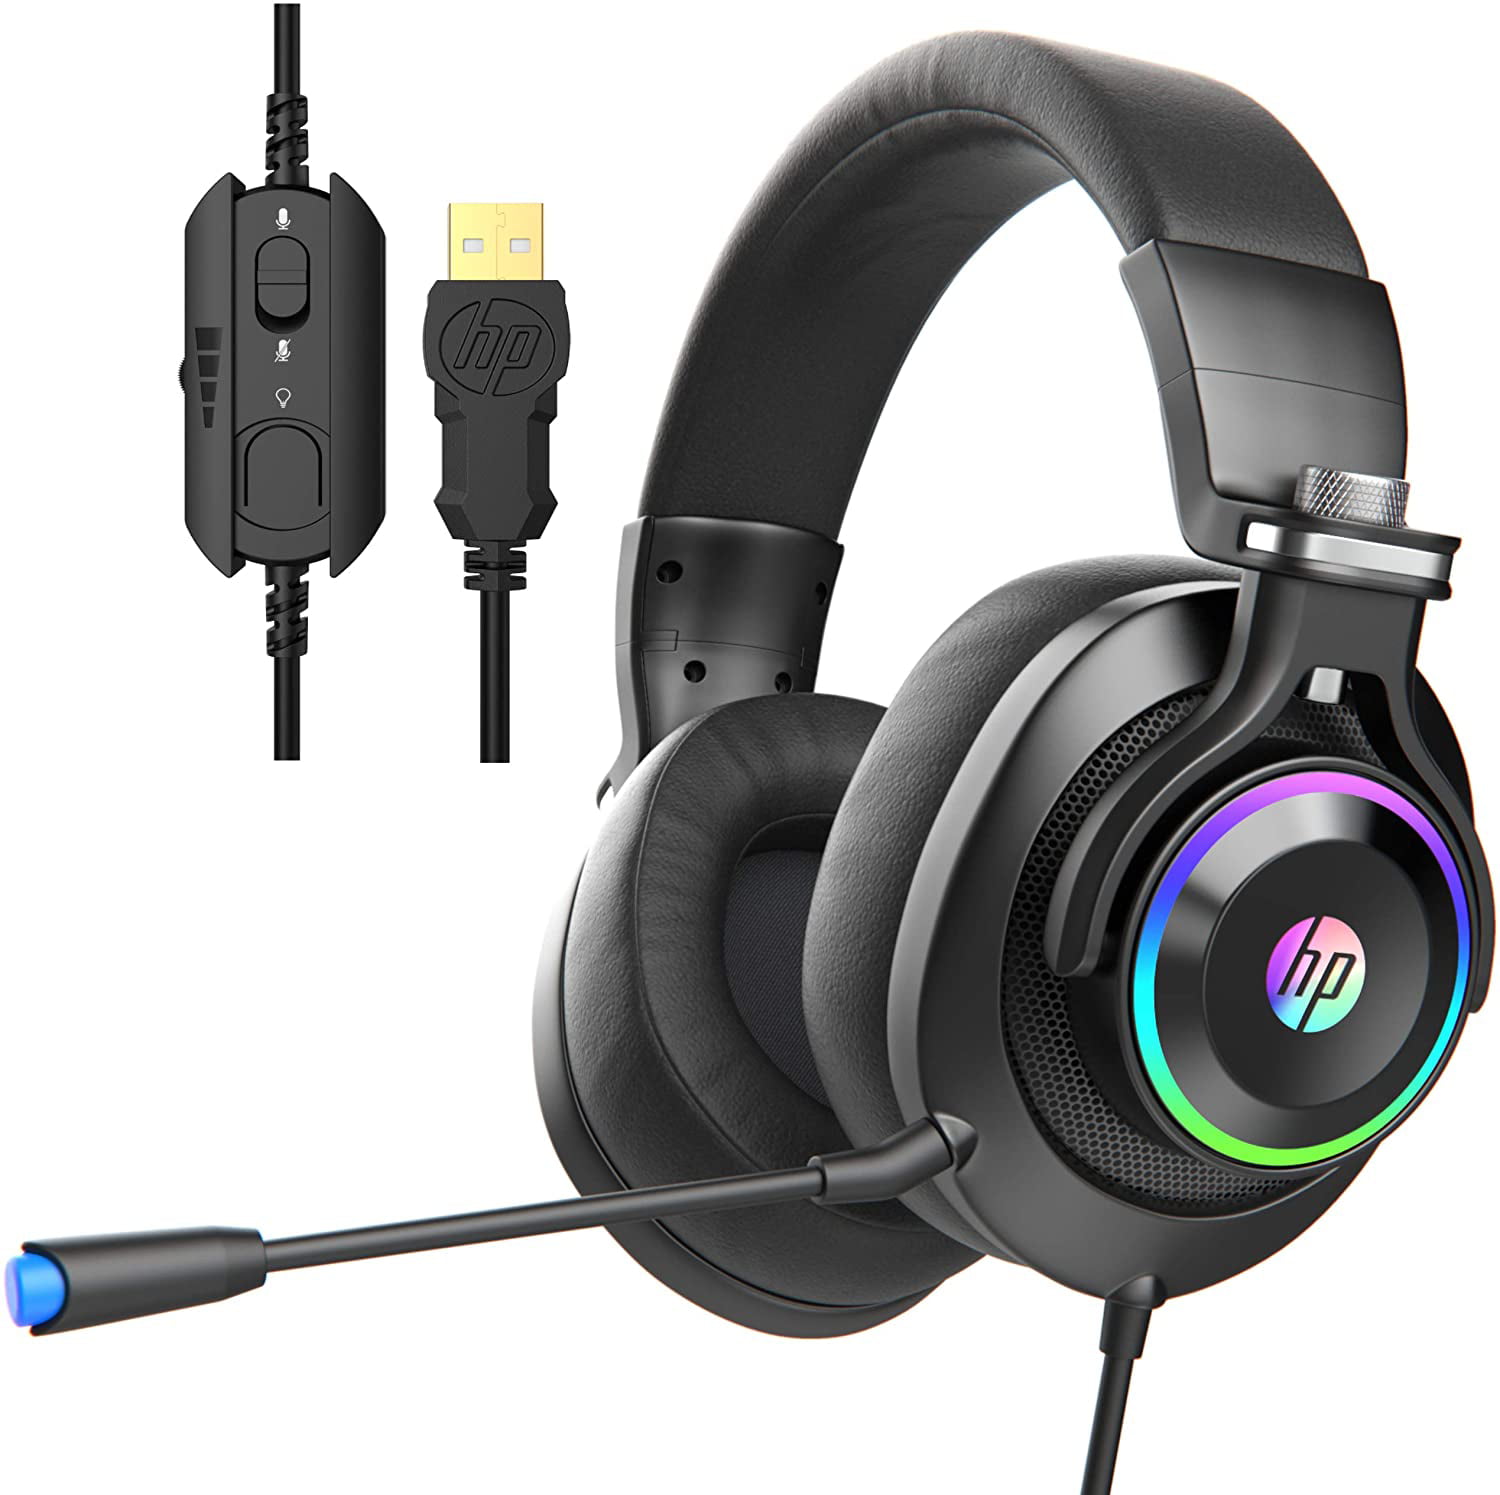 HP USB PC Gaming Headset with Microphone. 7.1 Surround Sound, RGB LED